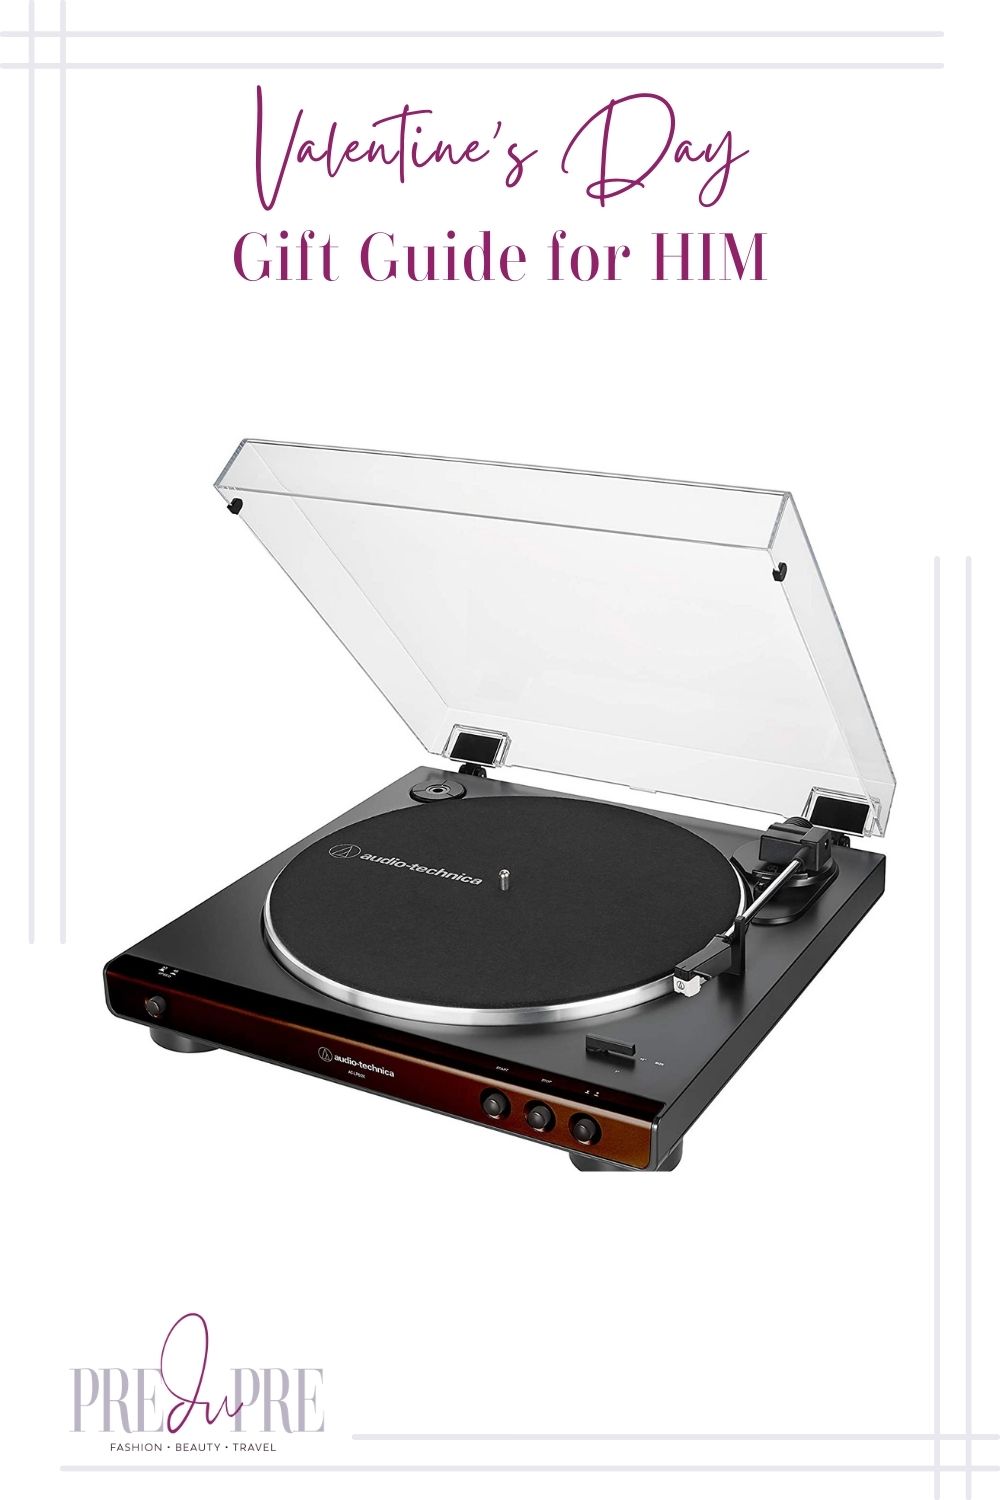 Black stereo turntable image with text in the center top stating "Valentine's Day Gift Guide for Him."